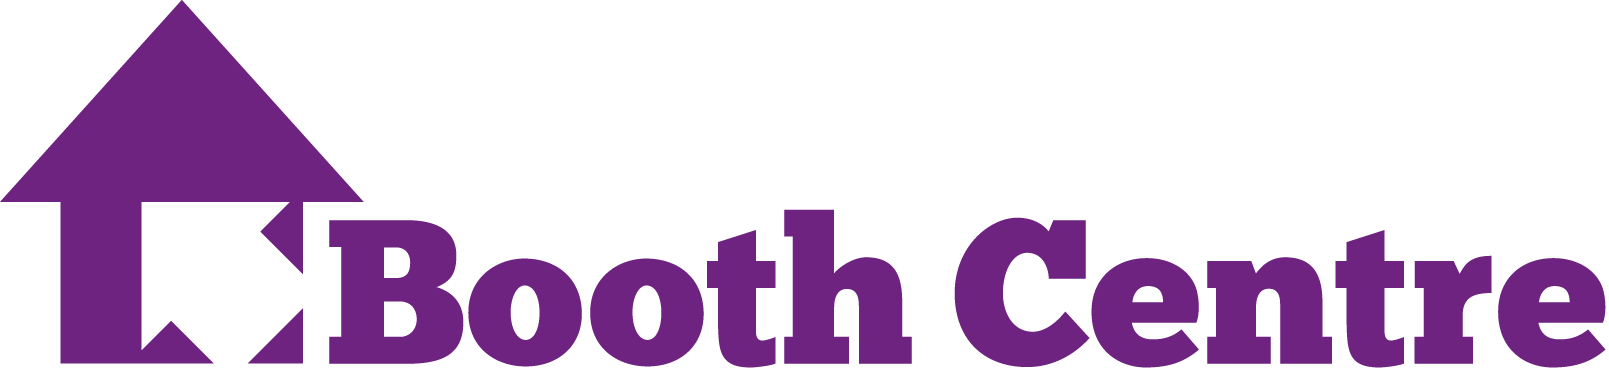 logo for The Booth Centre